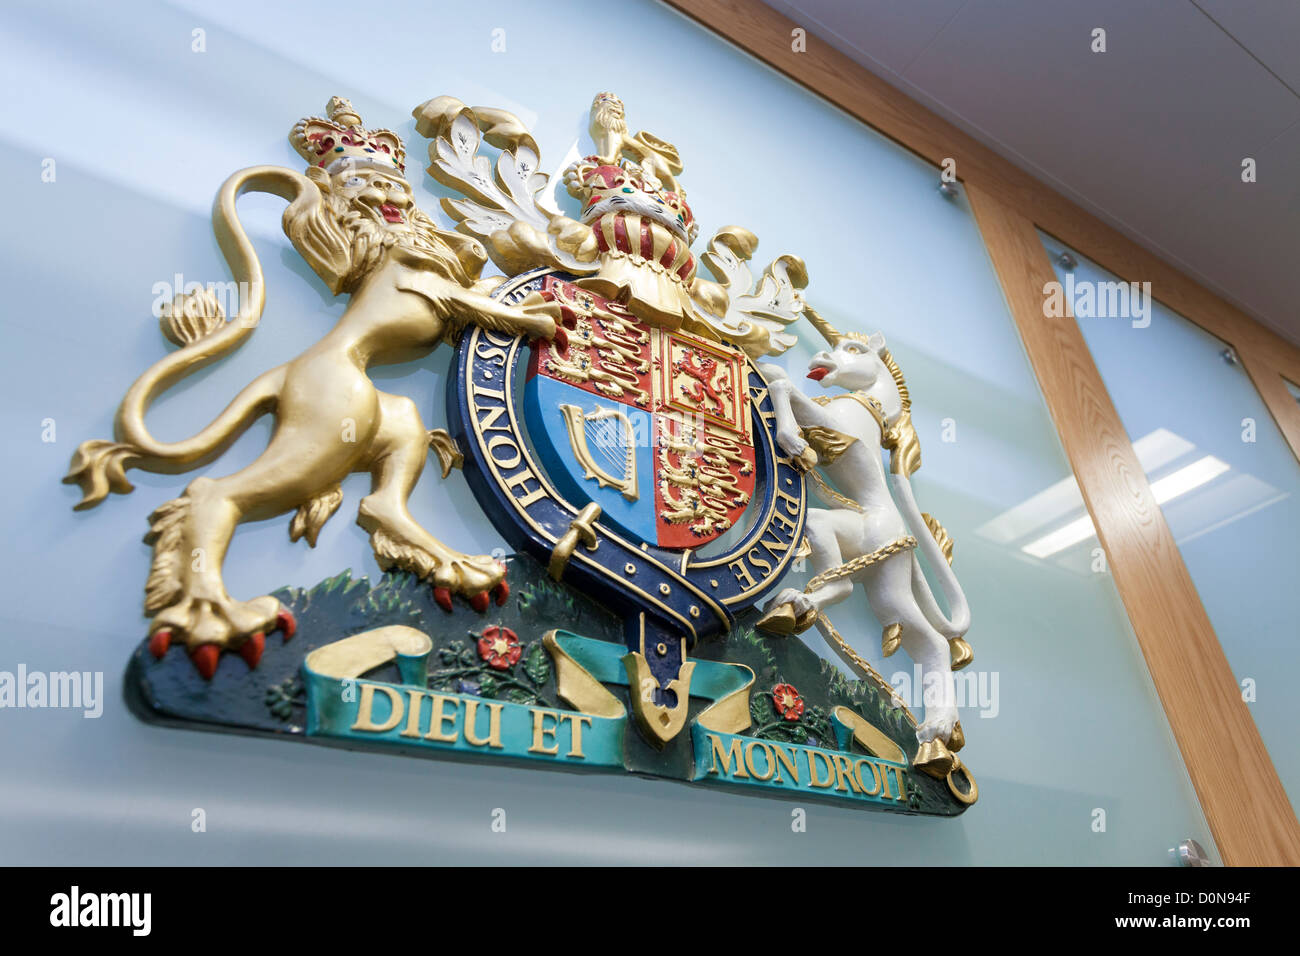 The shield of the Coat of Arms of the United Kingdon behind a Law Court bench. Stock Photo